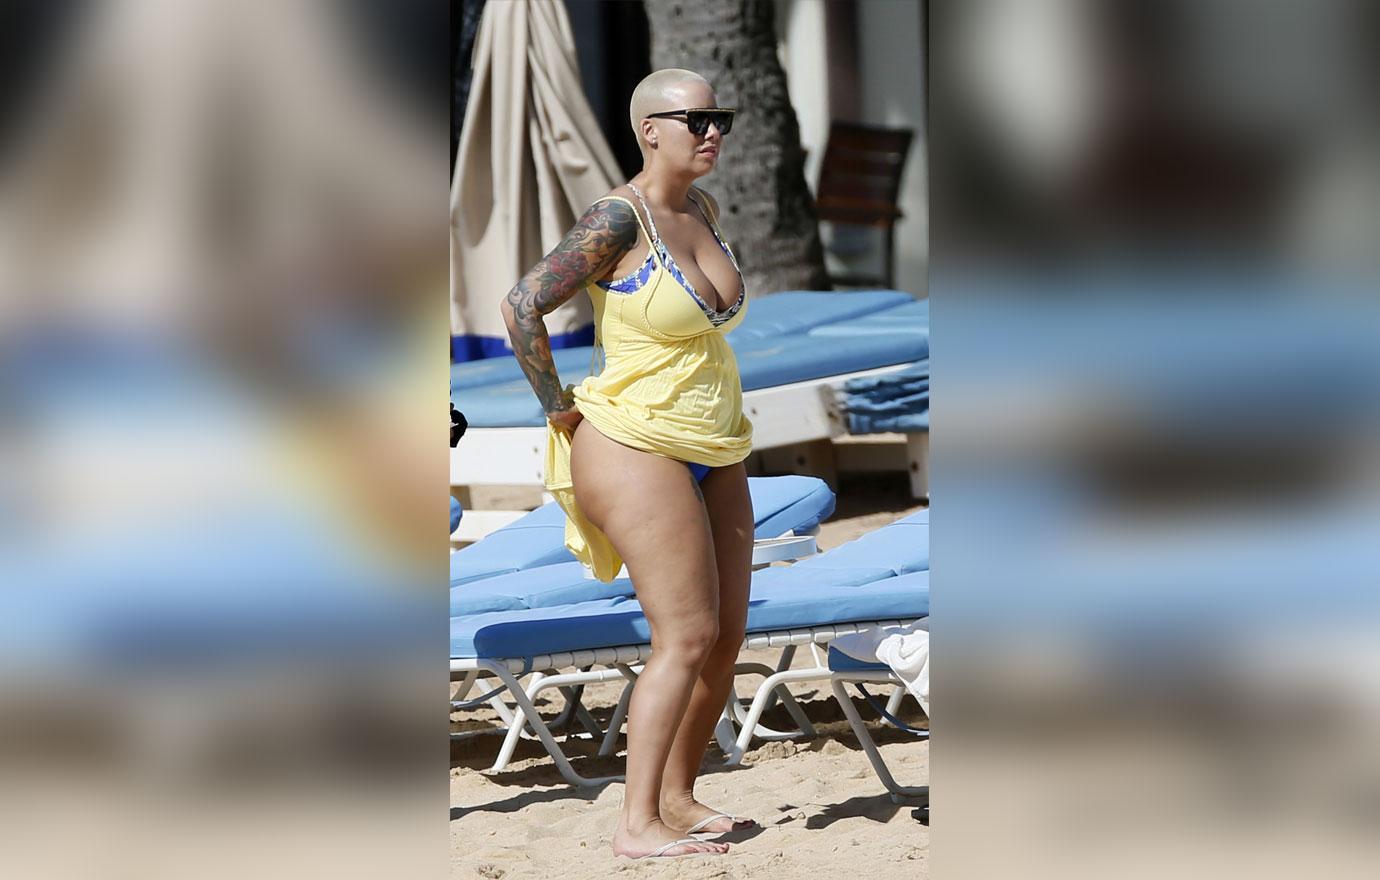 Amber rose thick